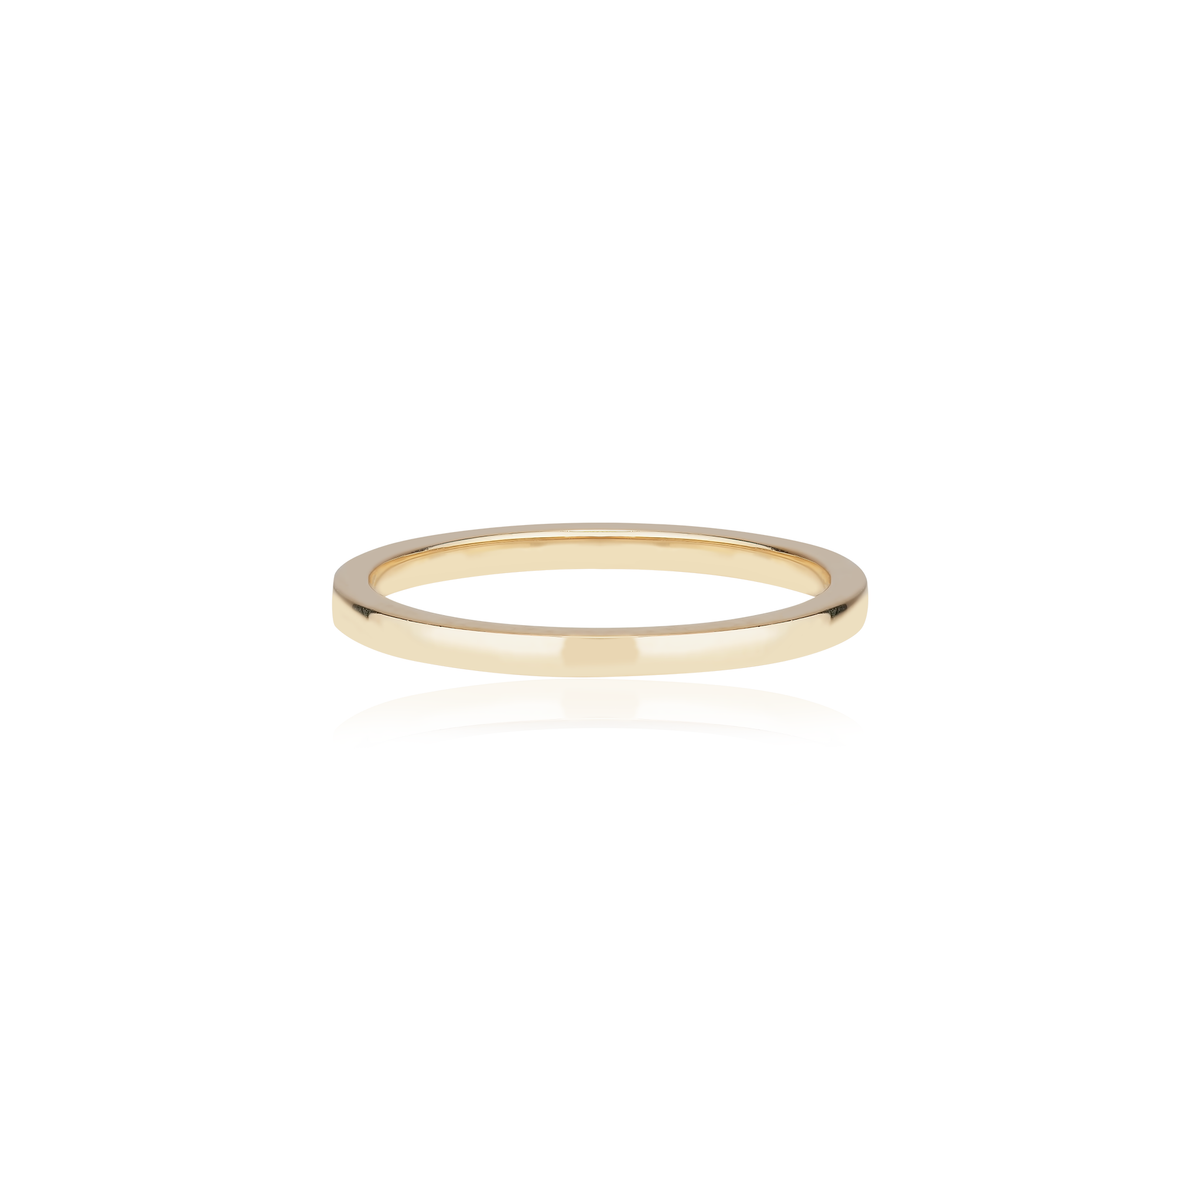 1.5mm Ring Band | 14k Solid Gold